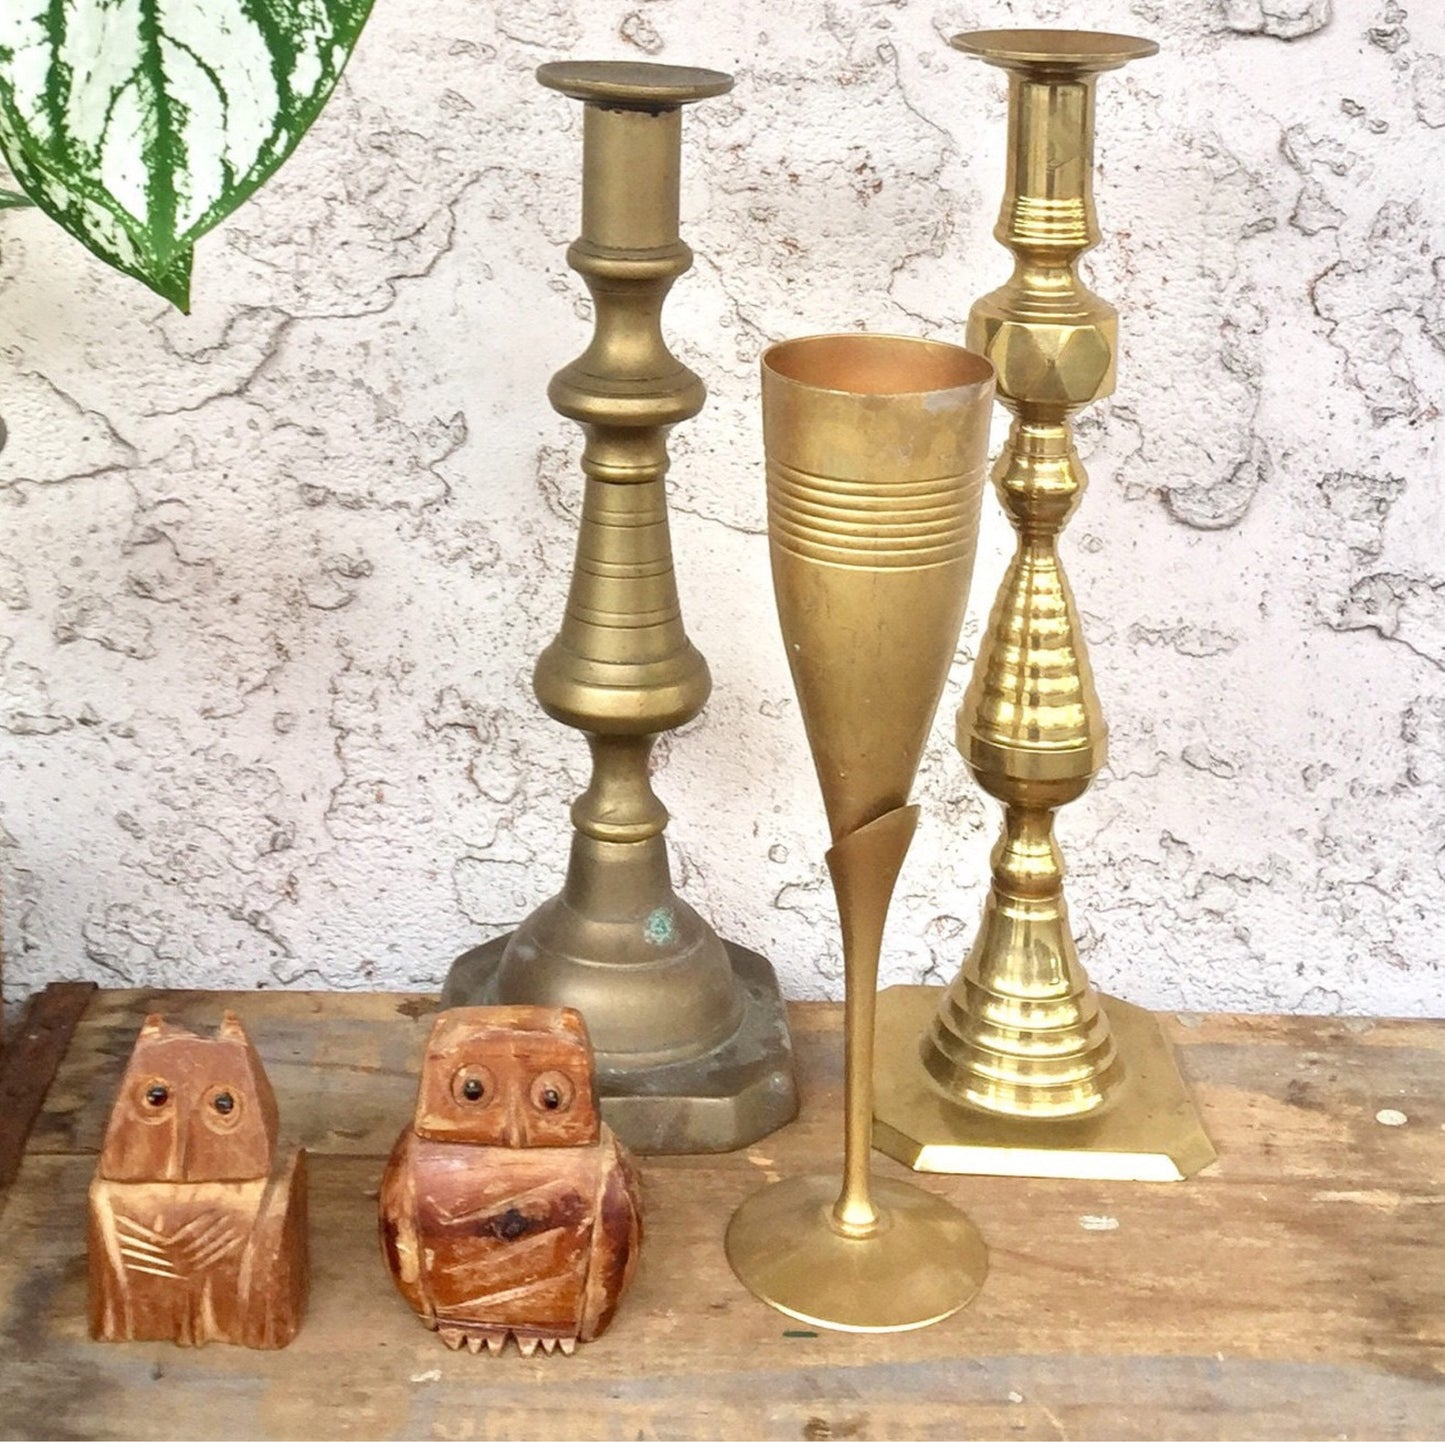 Vintage brass candlesticks and wood carved owl figurines on weathered wood surface.